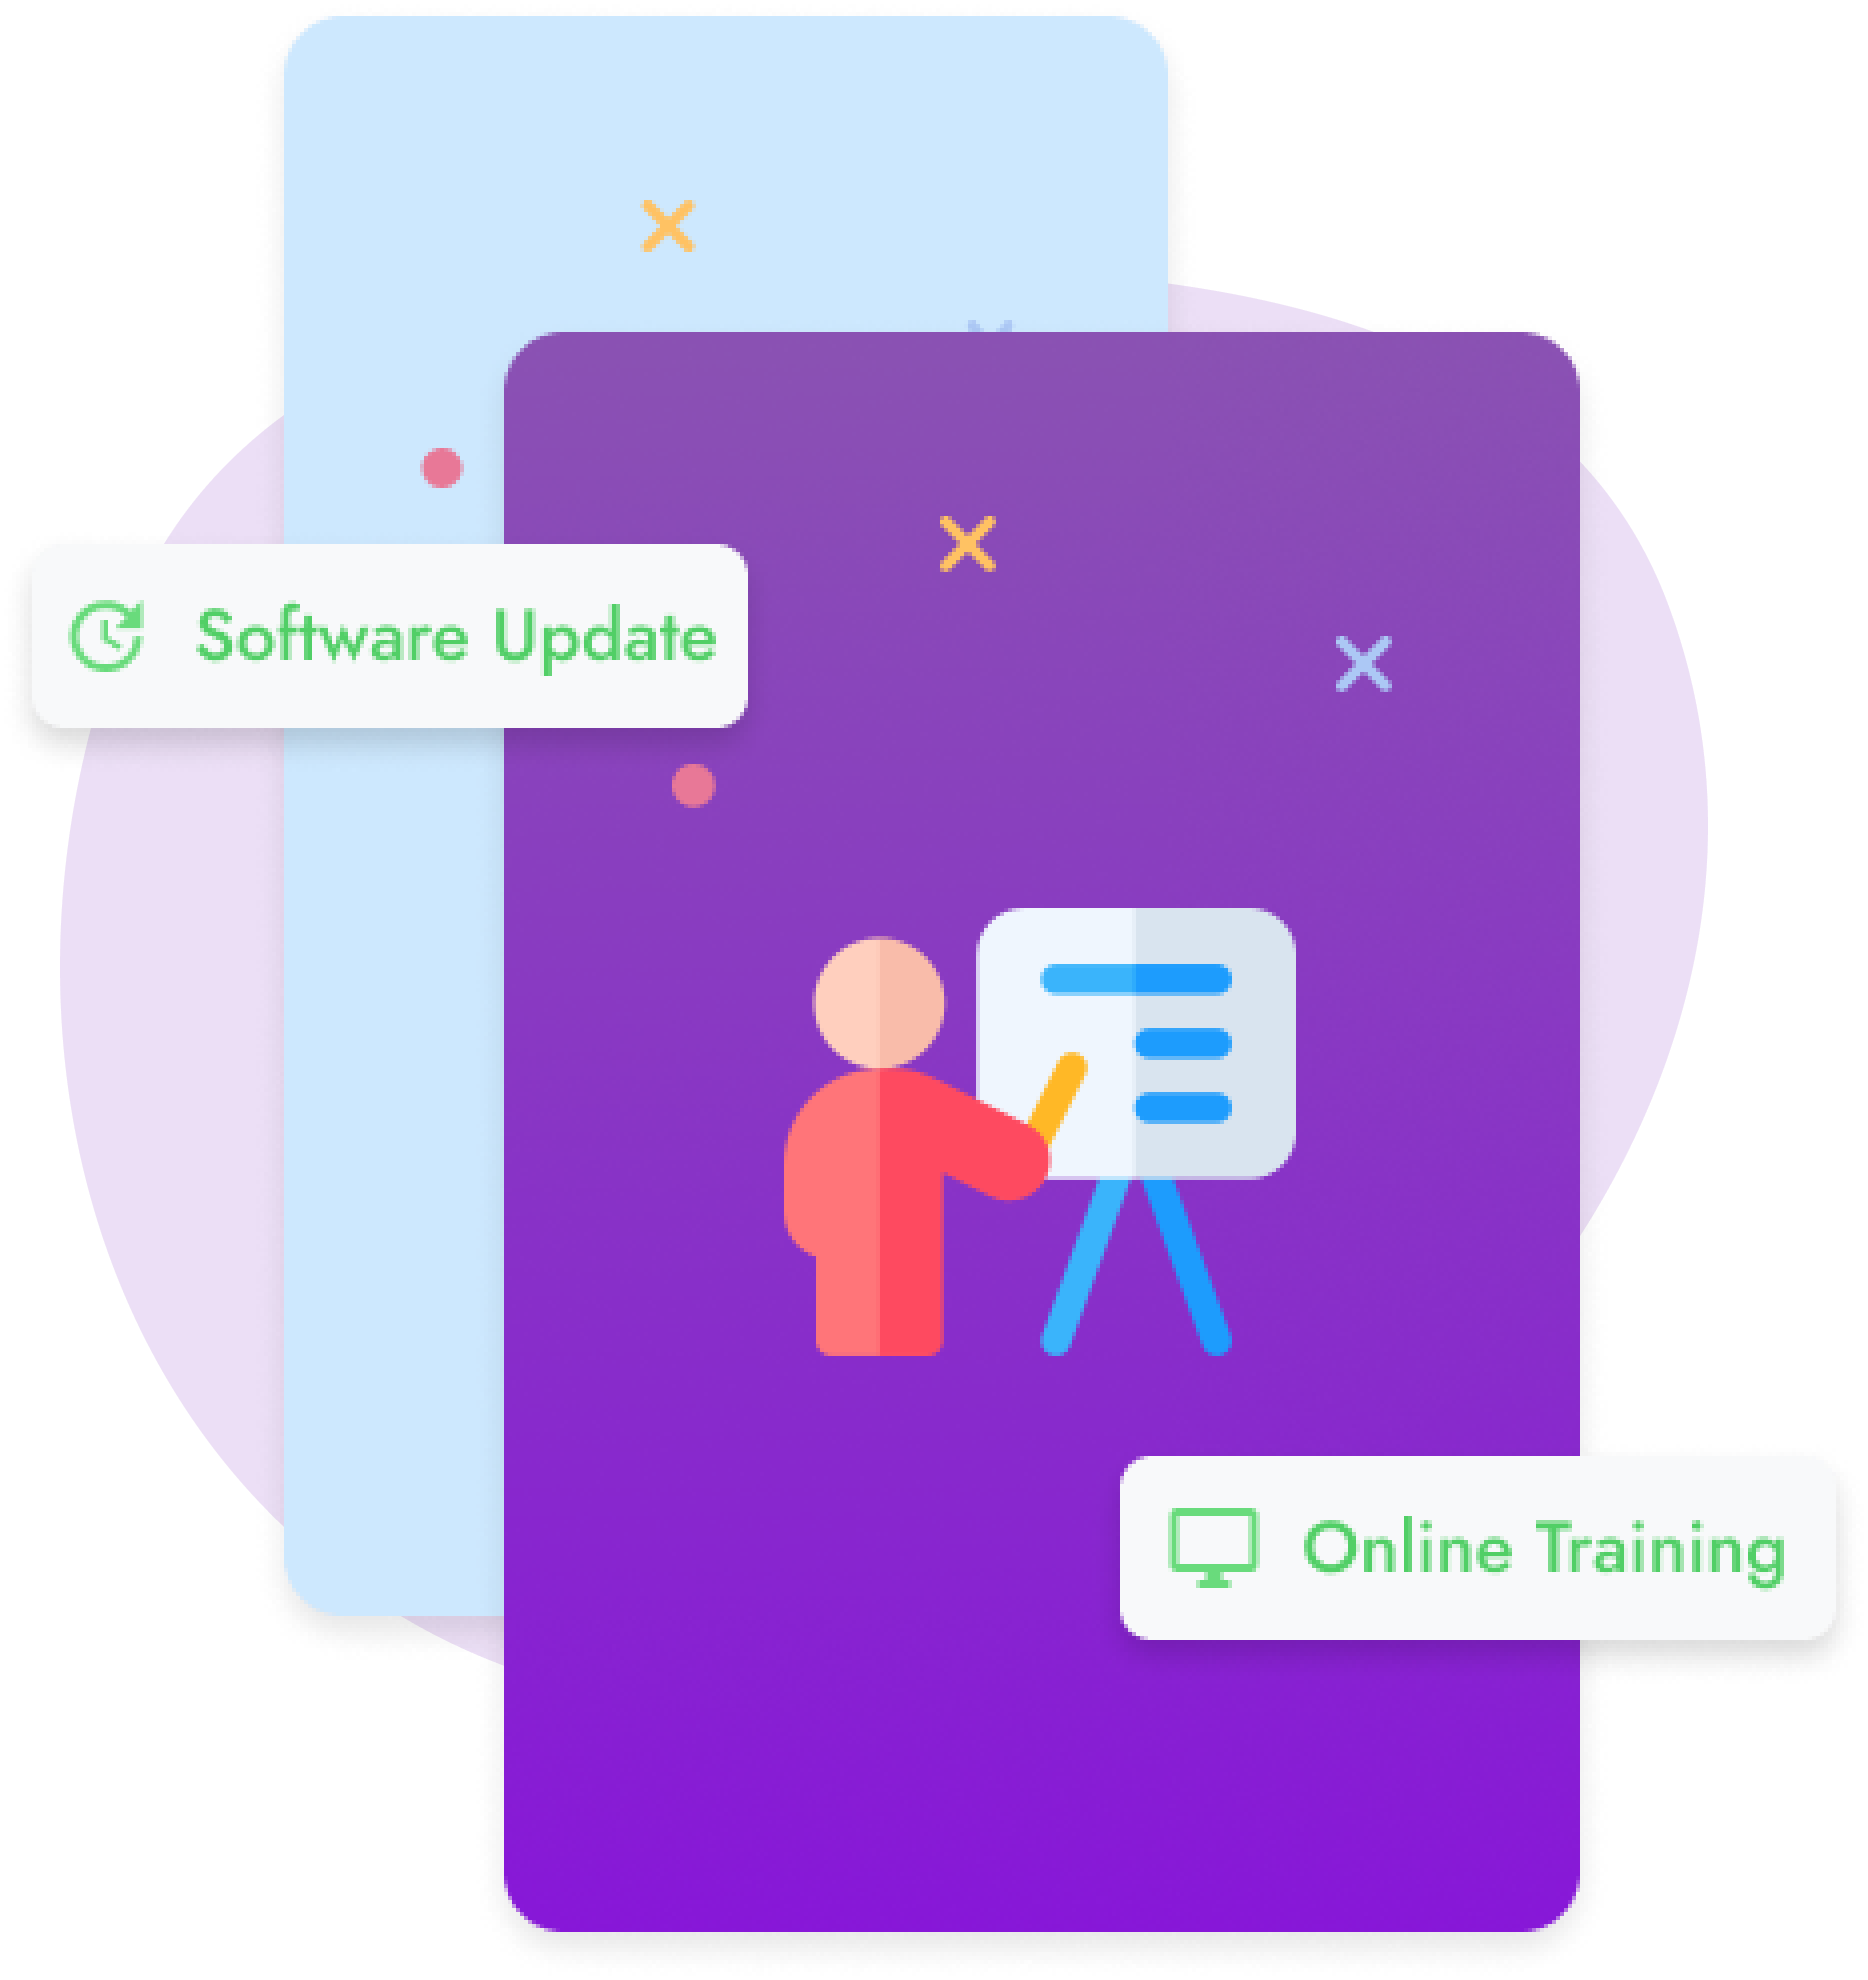 Free Support with Software Updates and Training